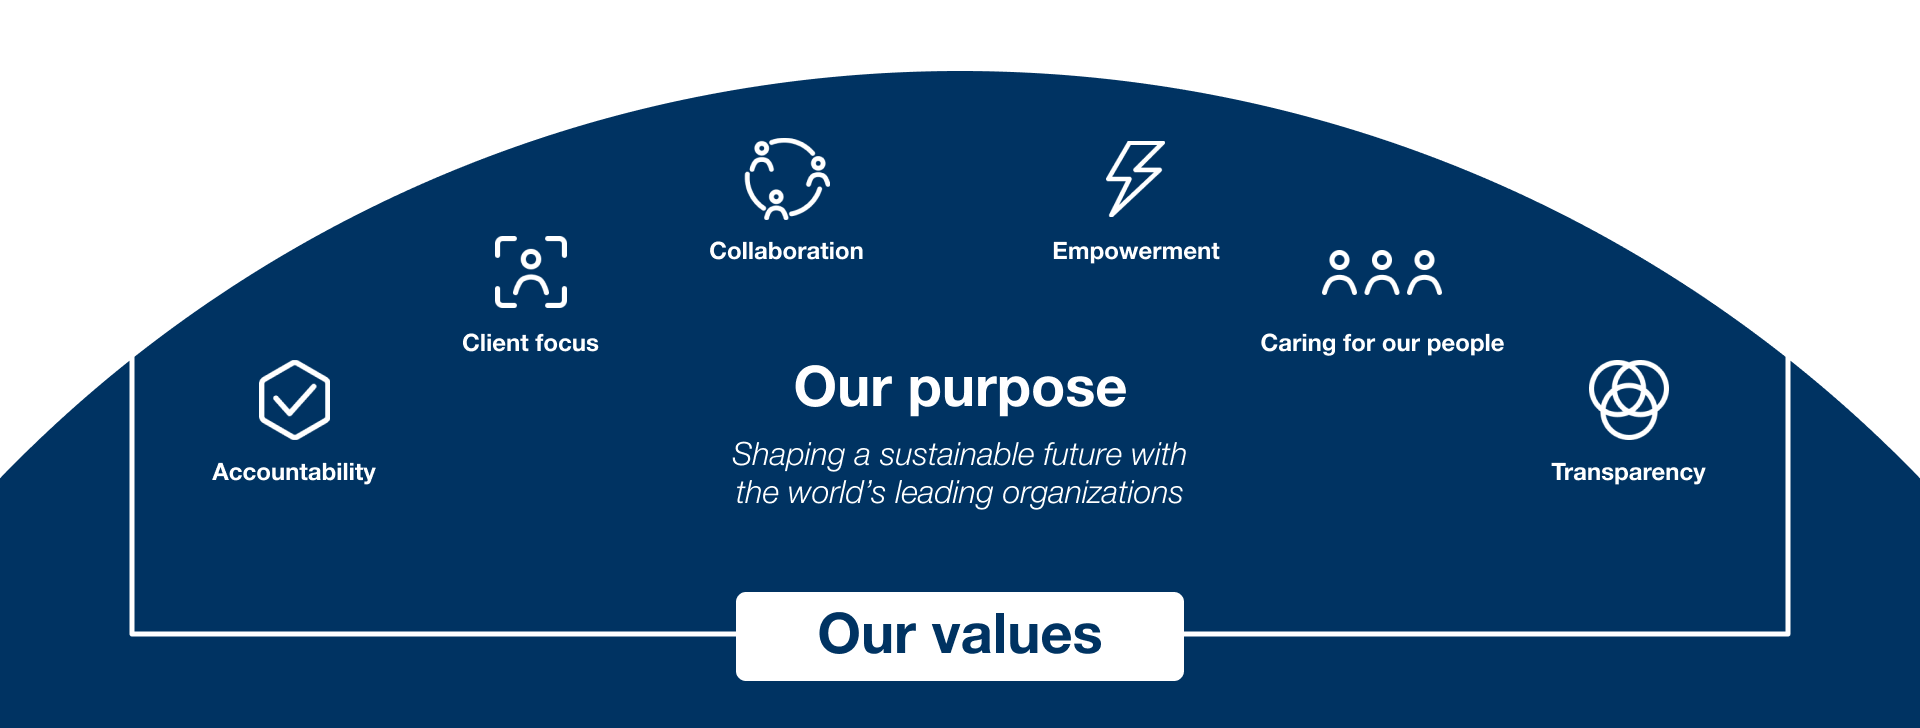 Our purpose and values graphic_V4.png